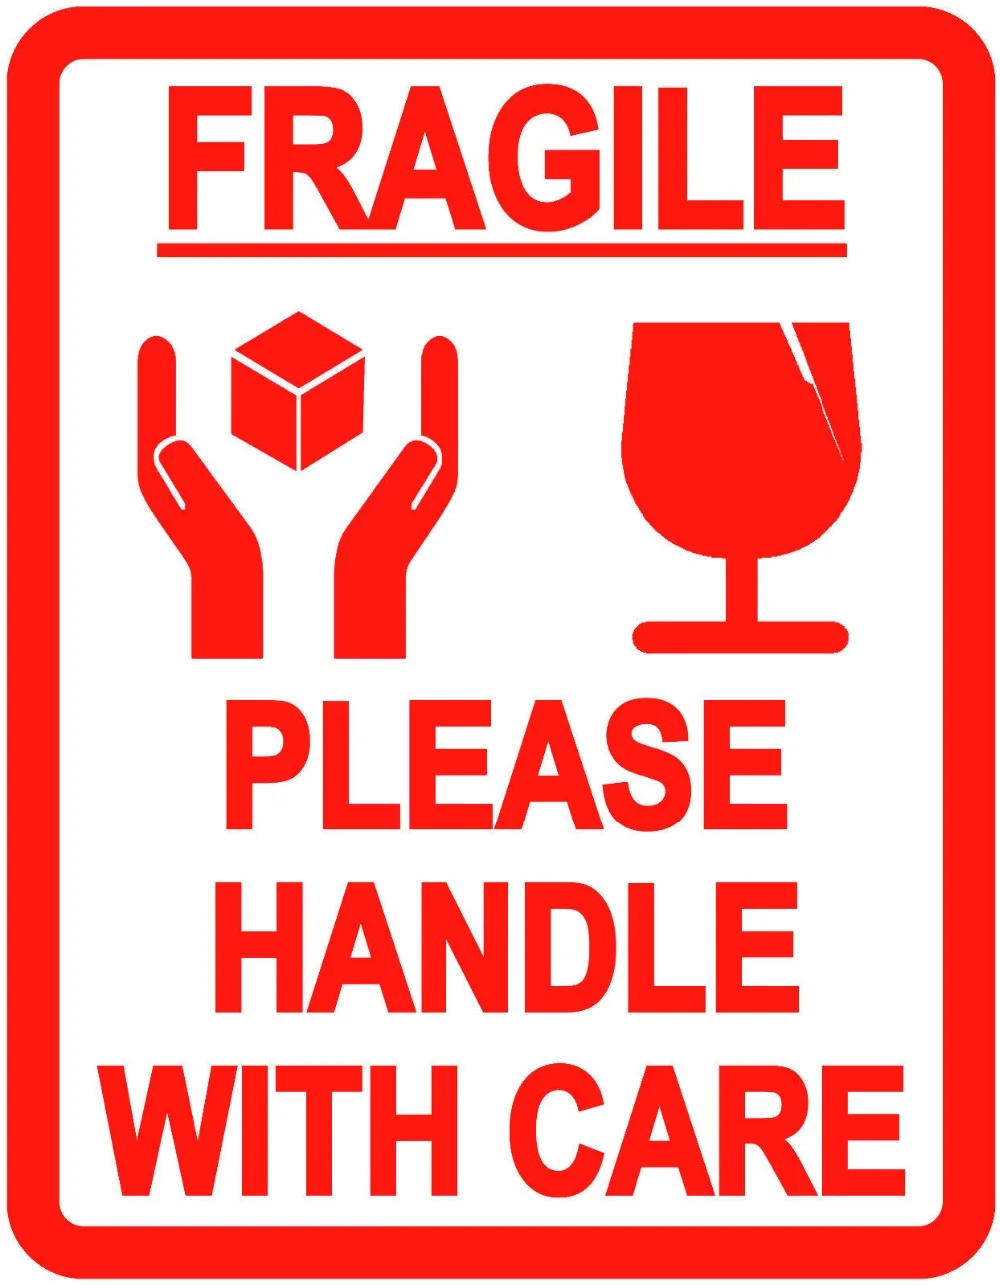 500pcs/lot FRAGILE PLEASE HANDLE WITH CARE self-adhesive Shipping Label Sticker, Item No.SS34